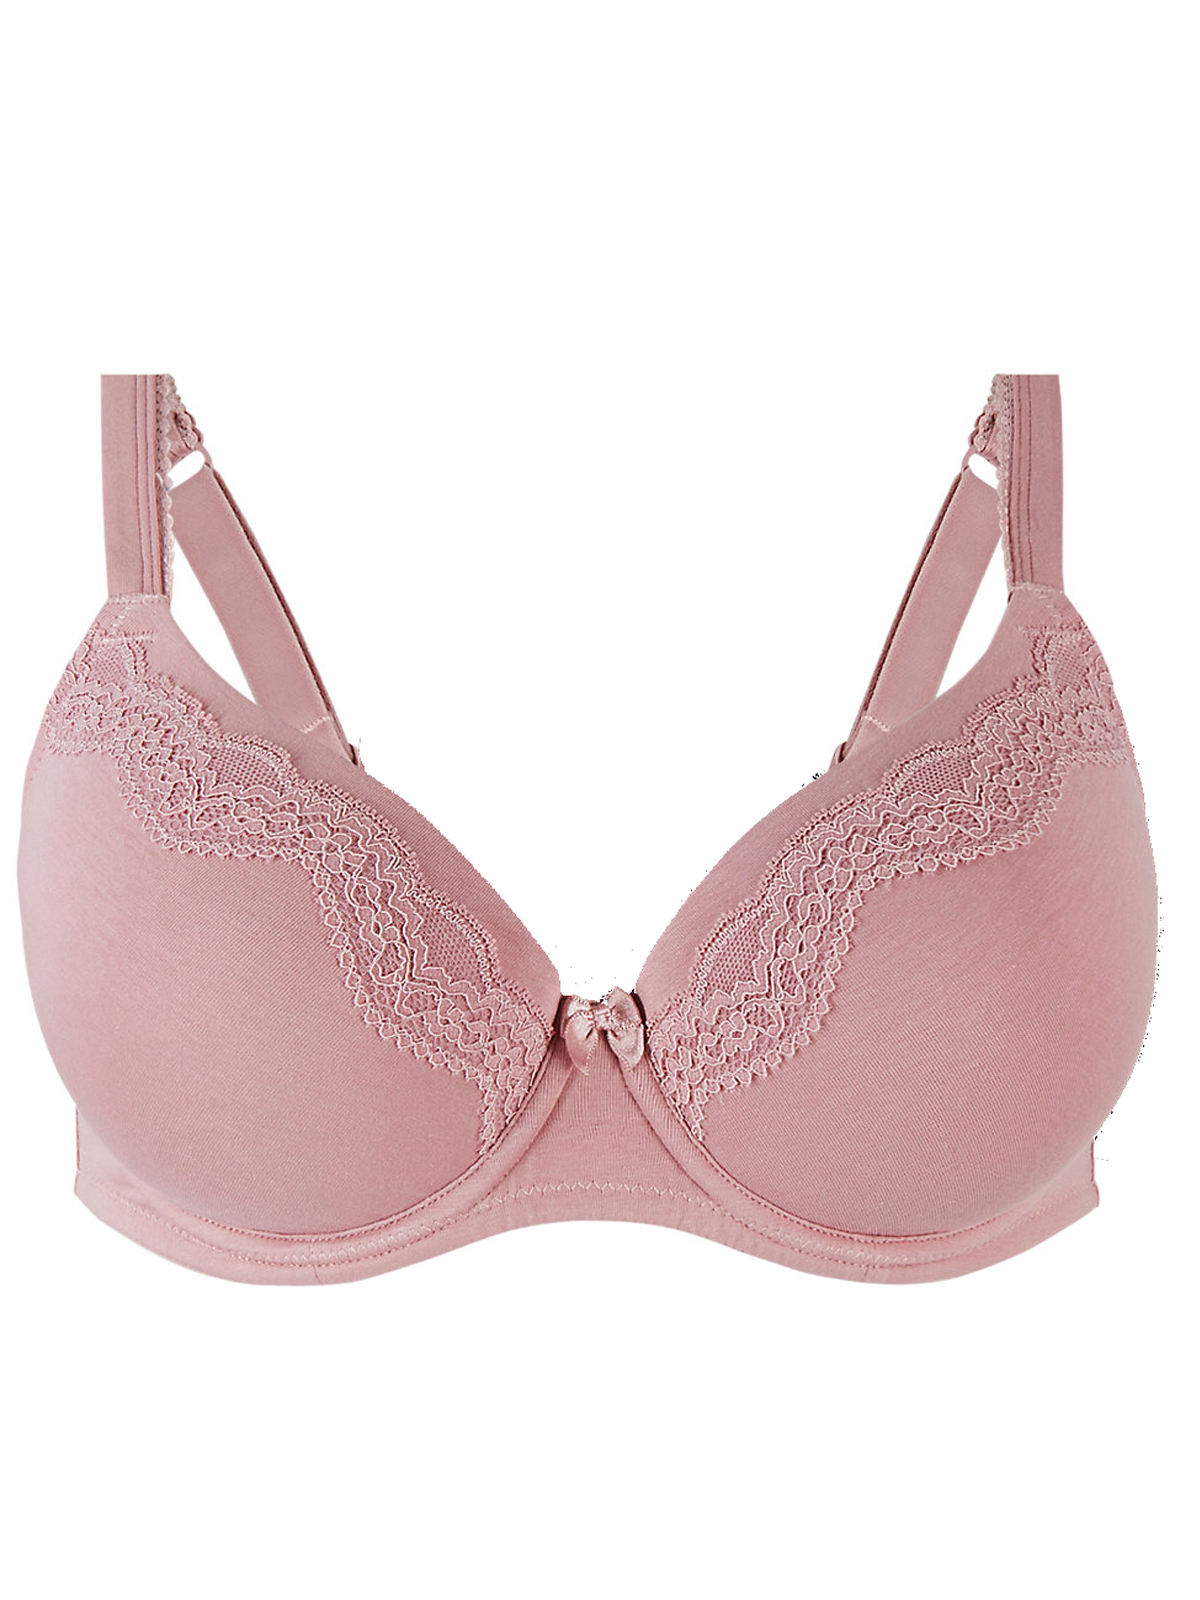 Marks and Spencer - - M&5 ASSORTED Plain & Lace Panelled Bras - Size 34 ...